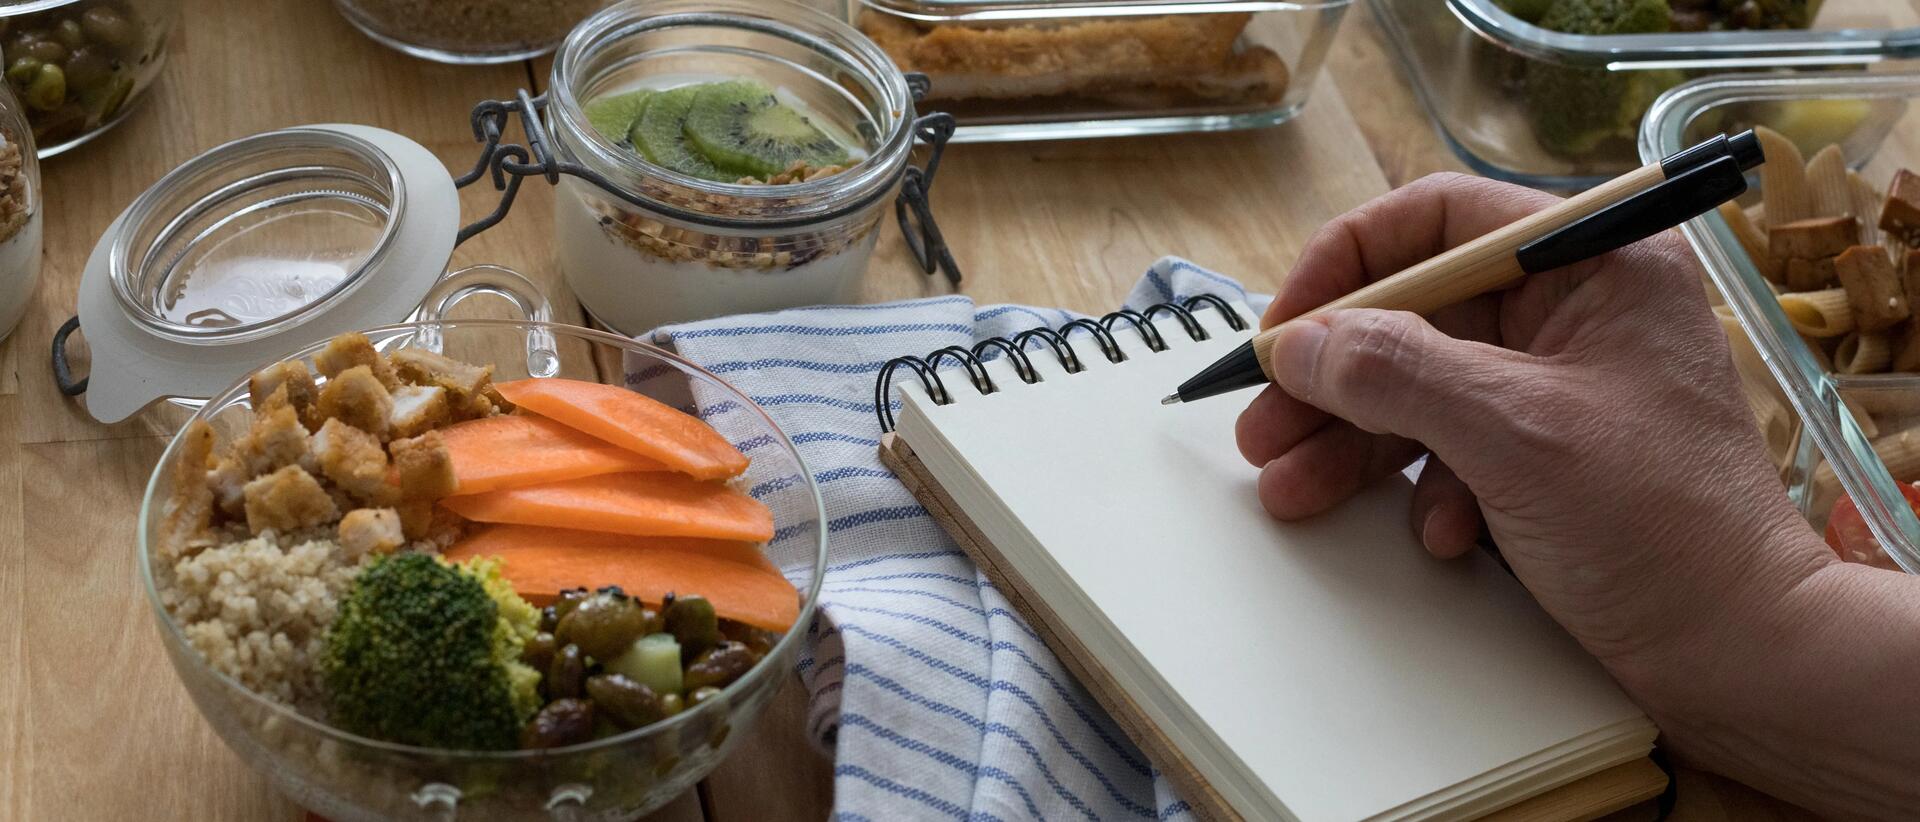 Man making notes on notepad with healthy food surrounding him